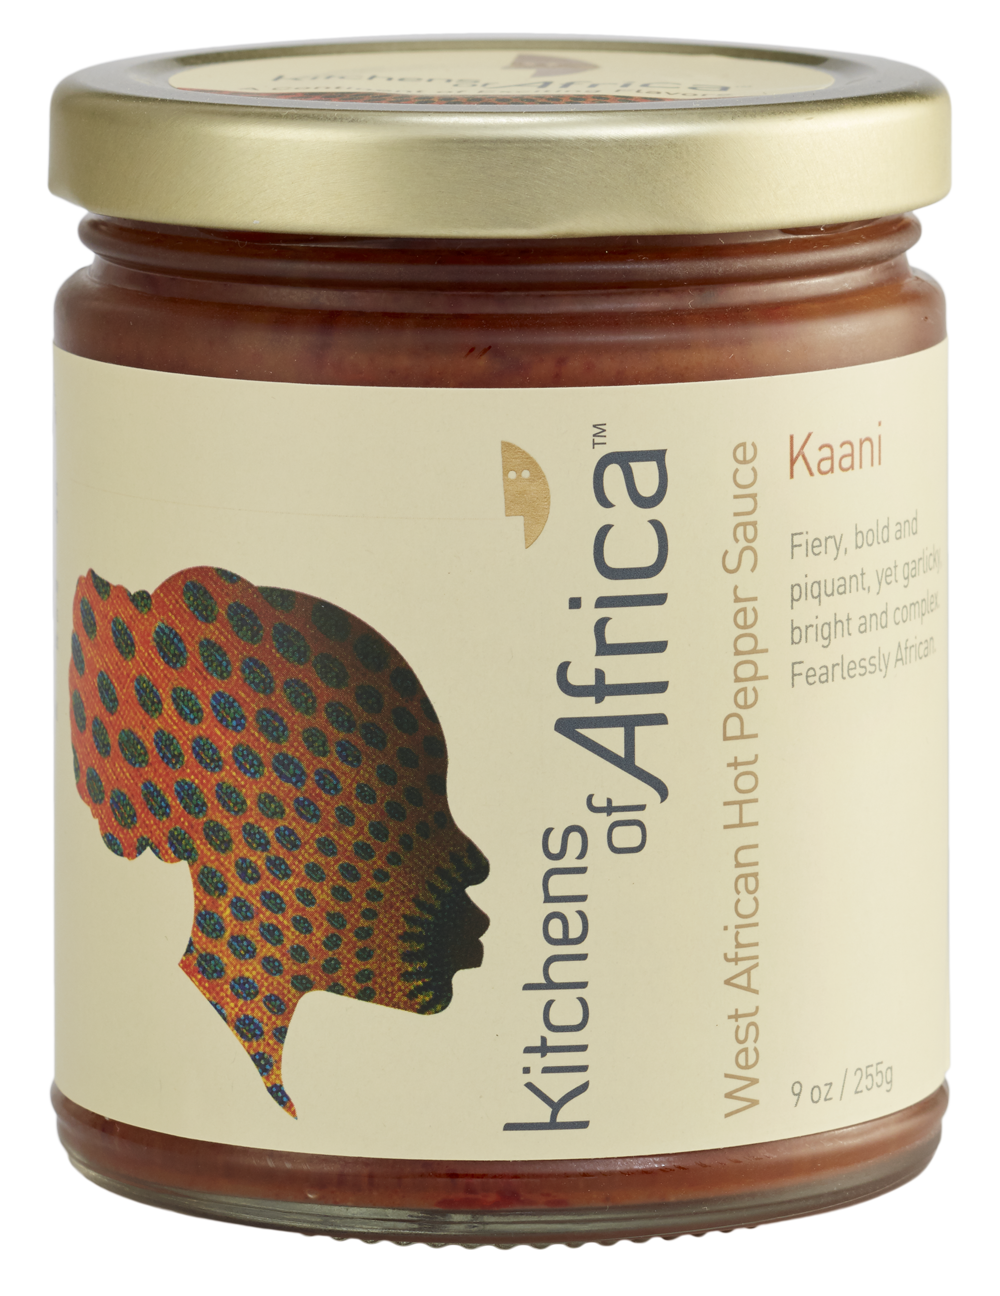 Kitchens of Africa - Kaani - West African Hot Sauce